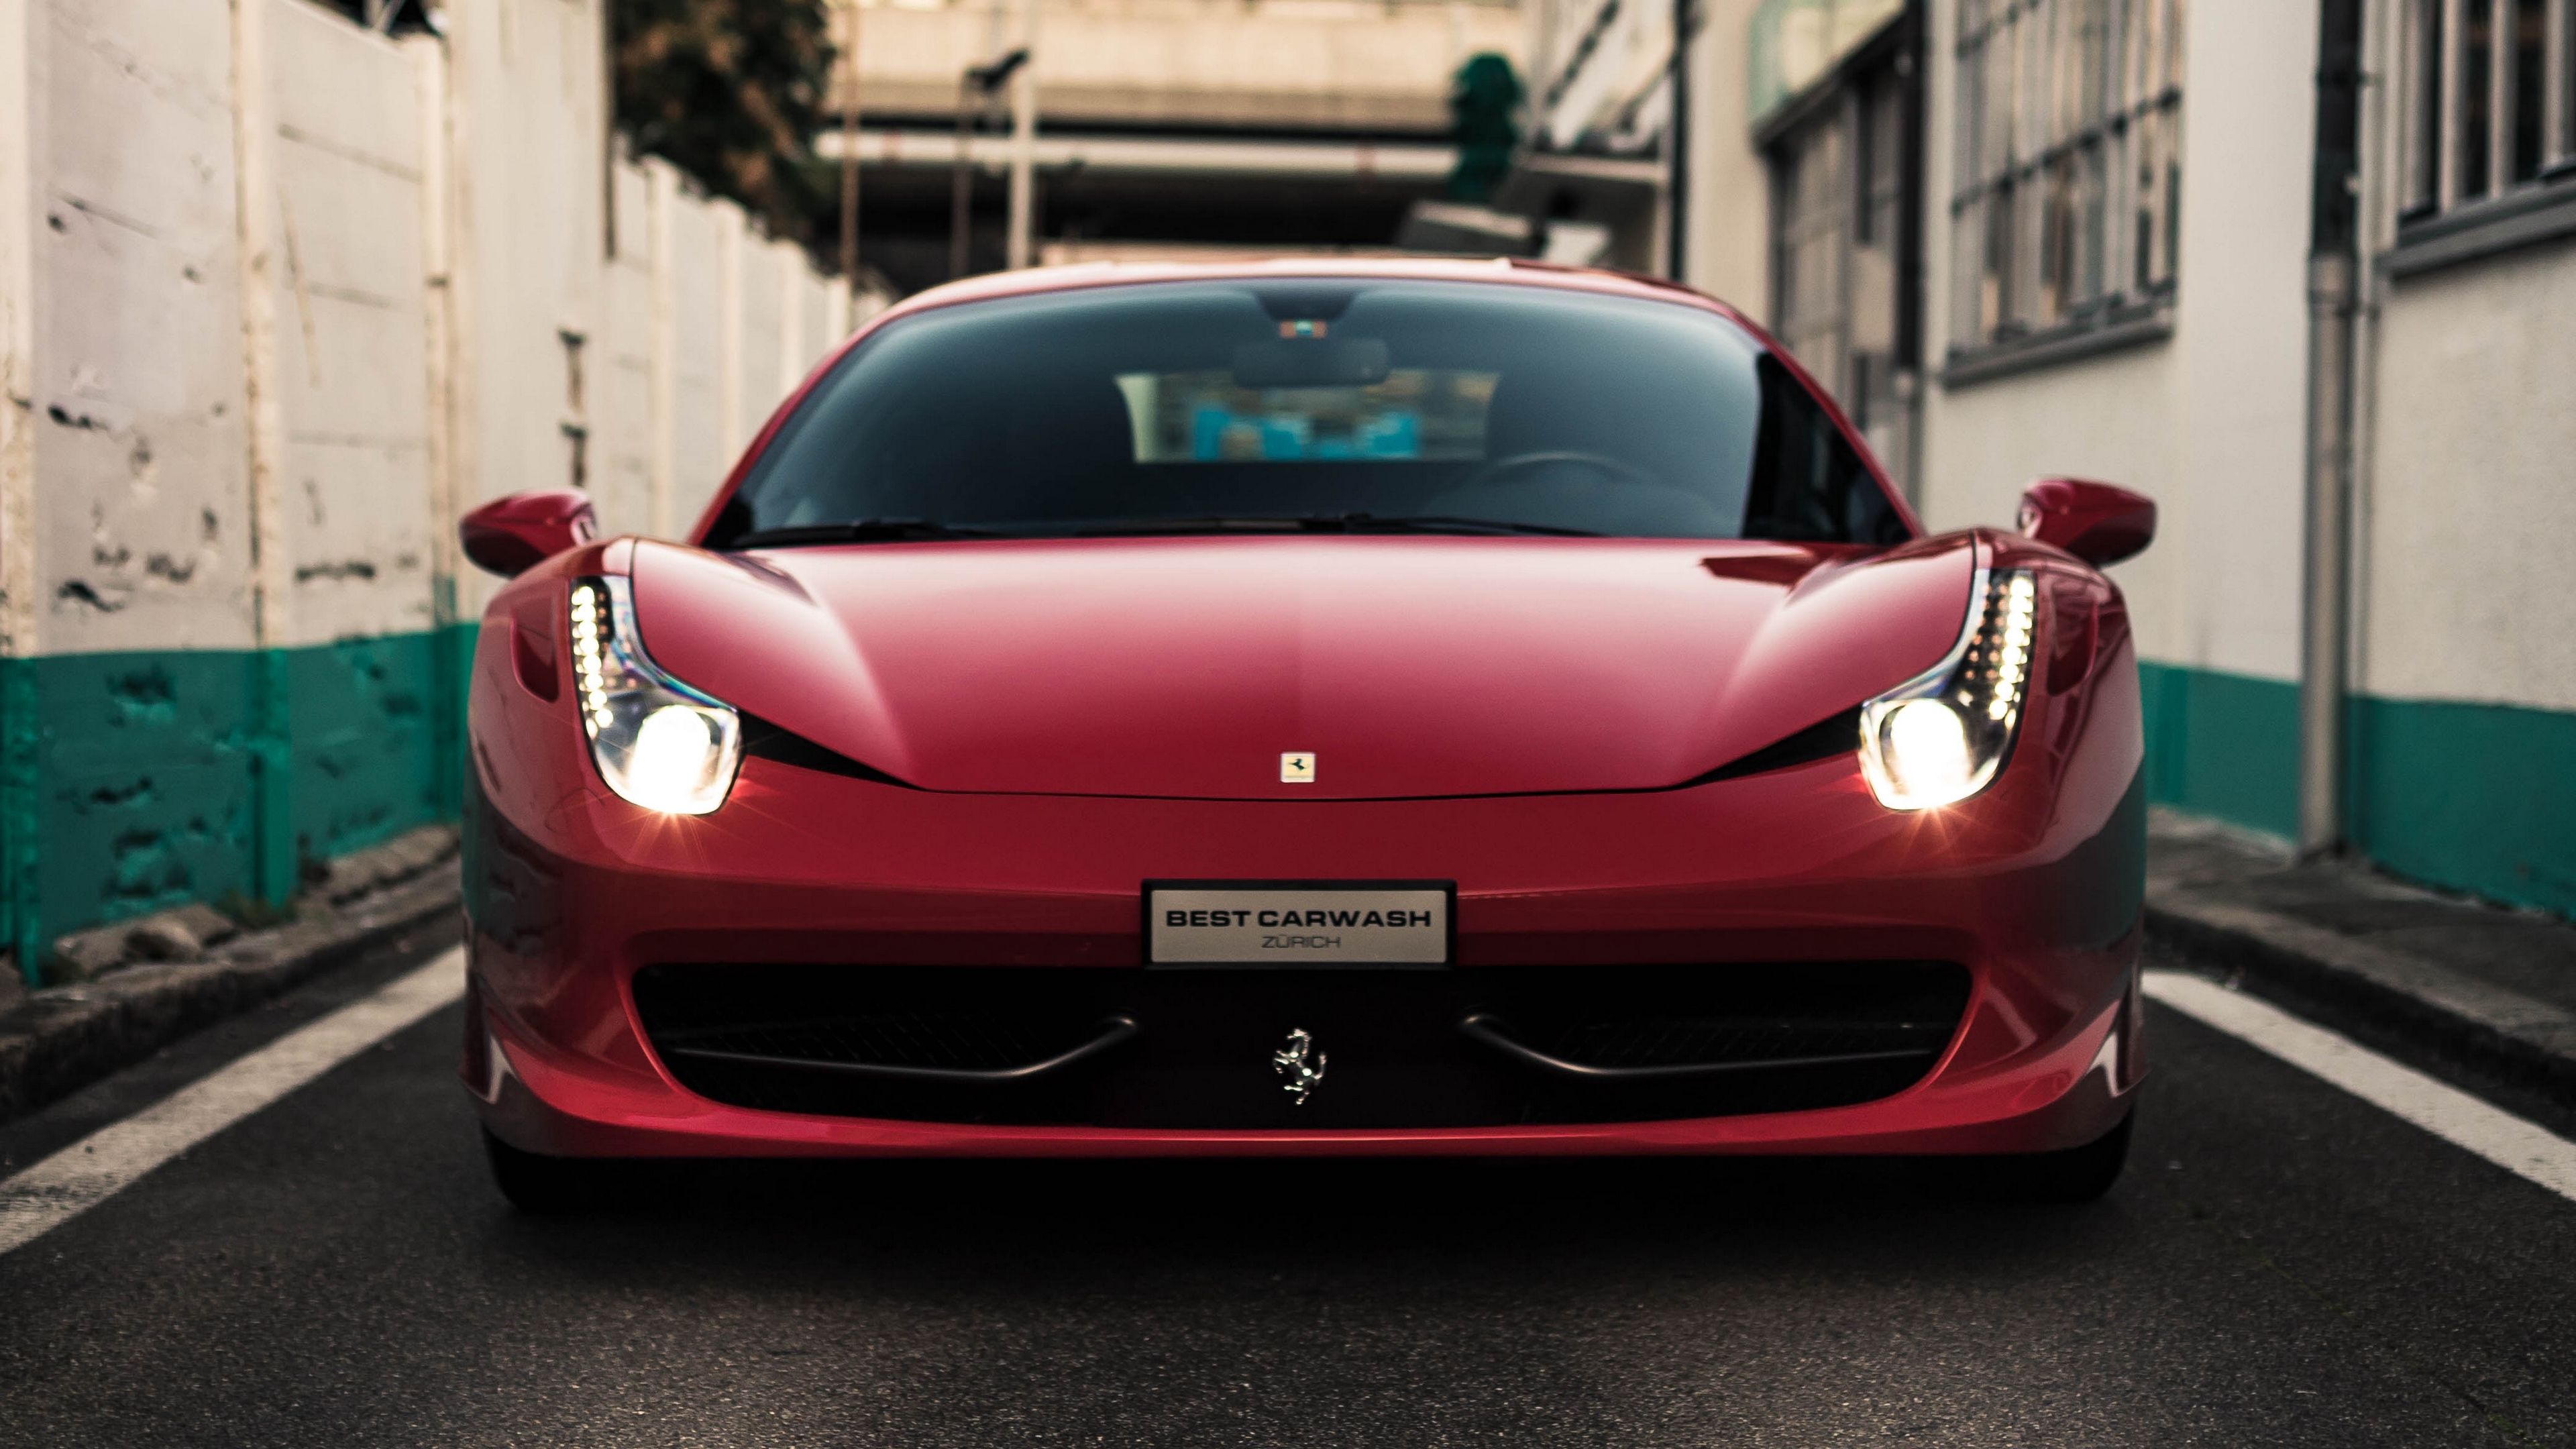 Ferrari 4K wallpaper for your desktop or mobile screen free and easy to download